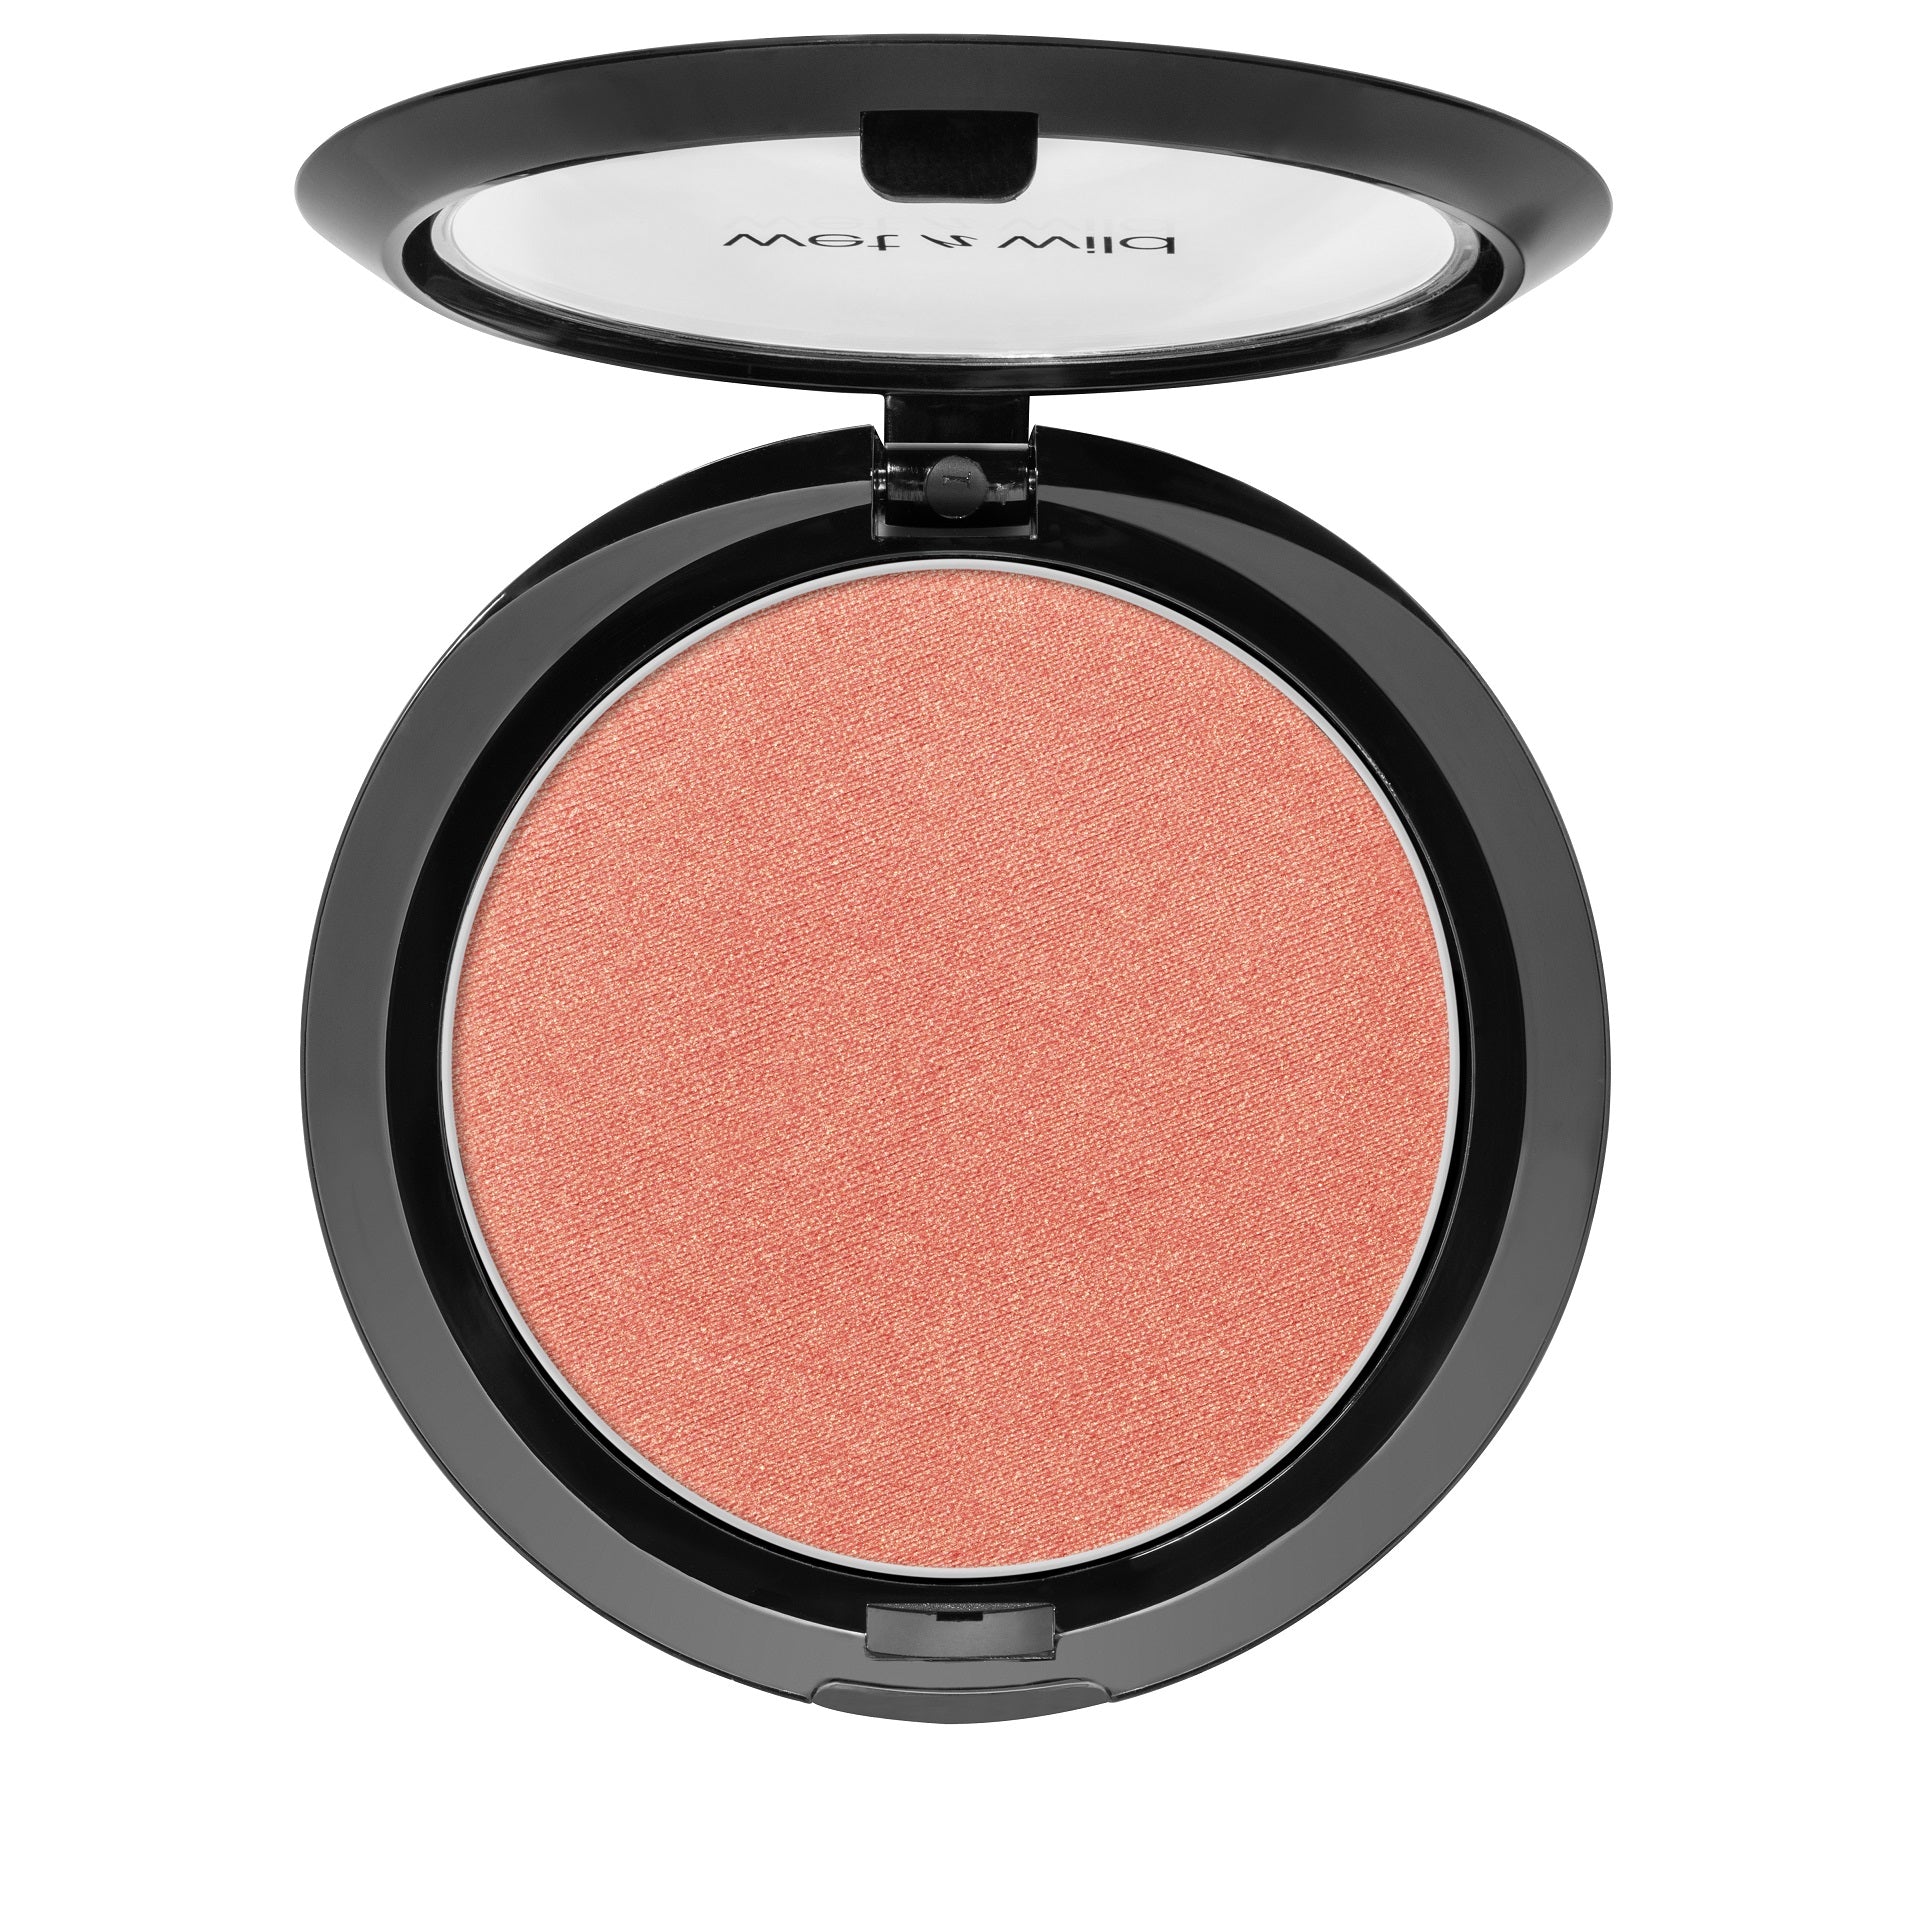 WET N WILD Color Icon Blush - Pearlescent Pink